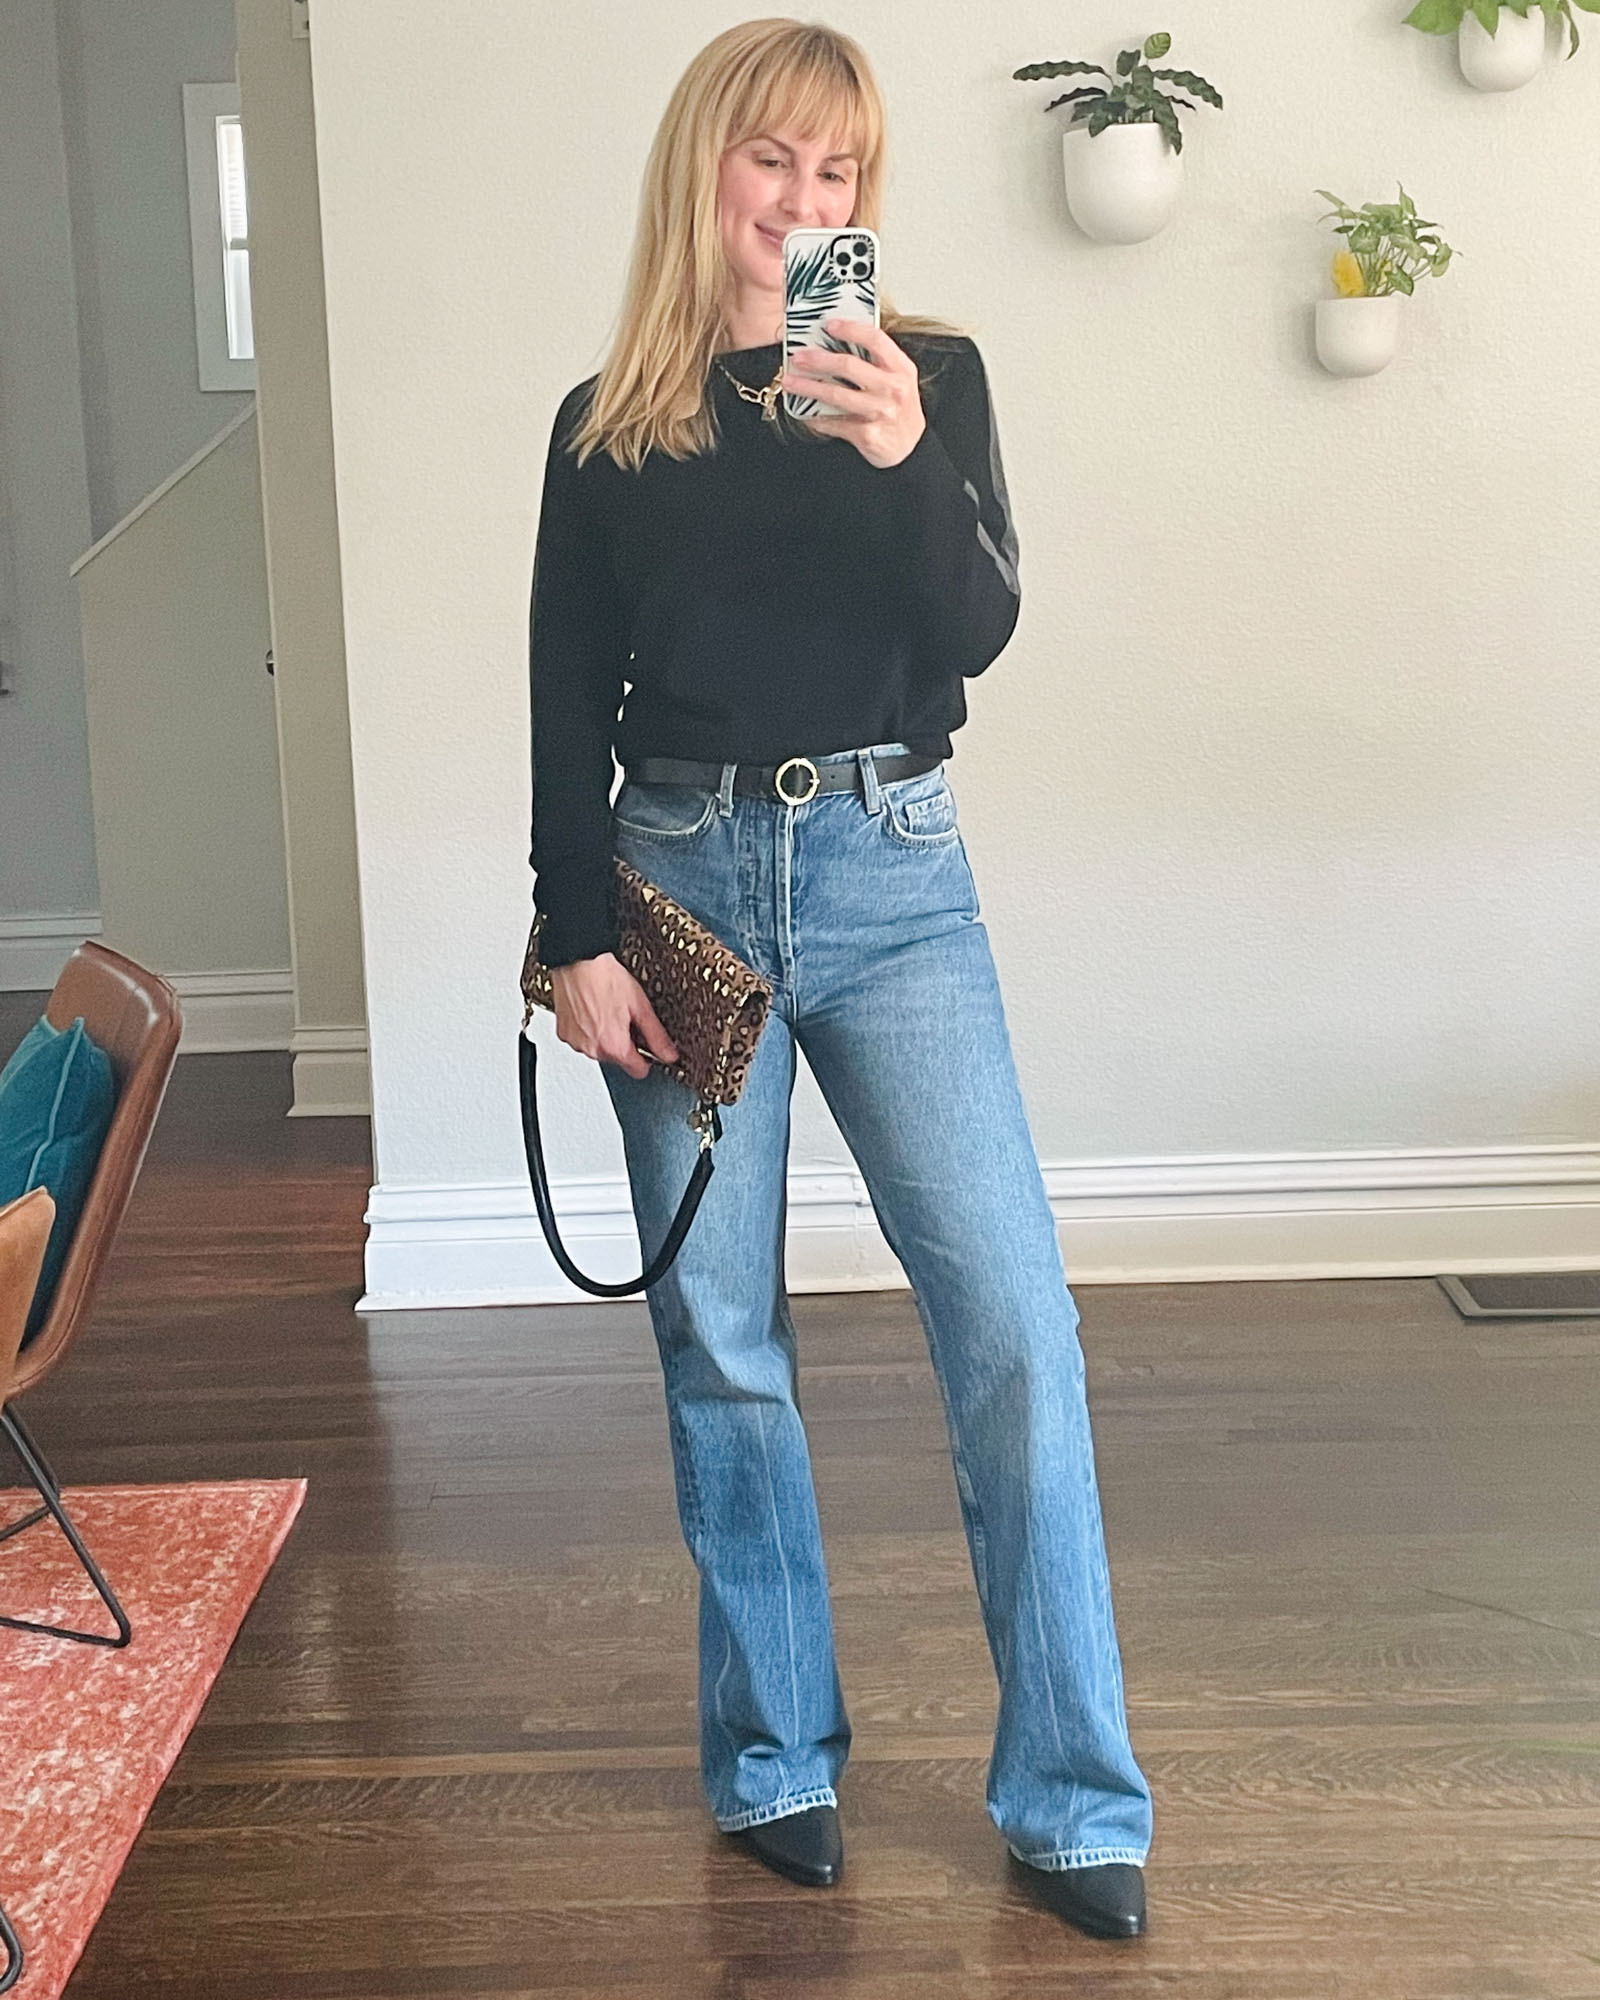 Wearing the Anine Bing bootcut Bryn jeans with a black sweater and Frame boots.